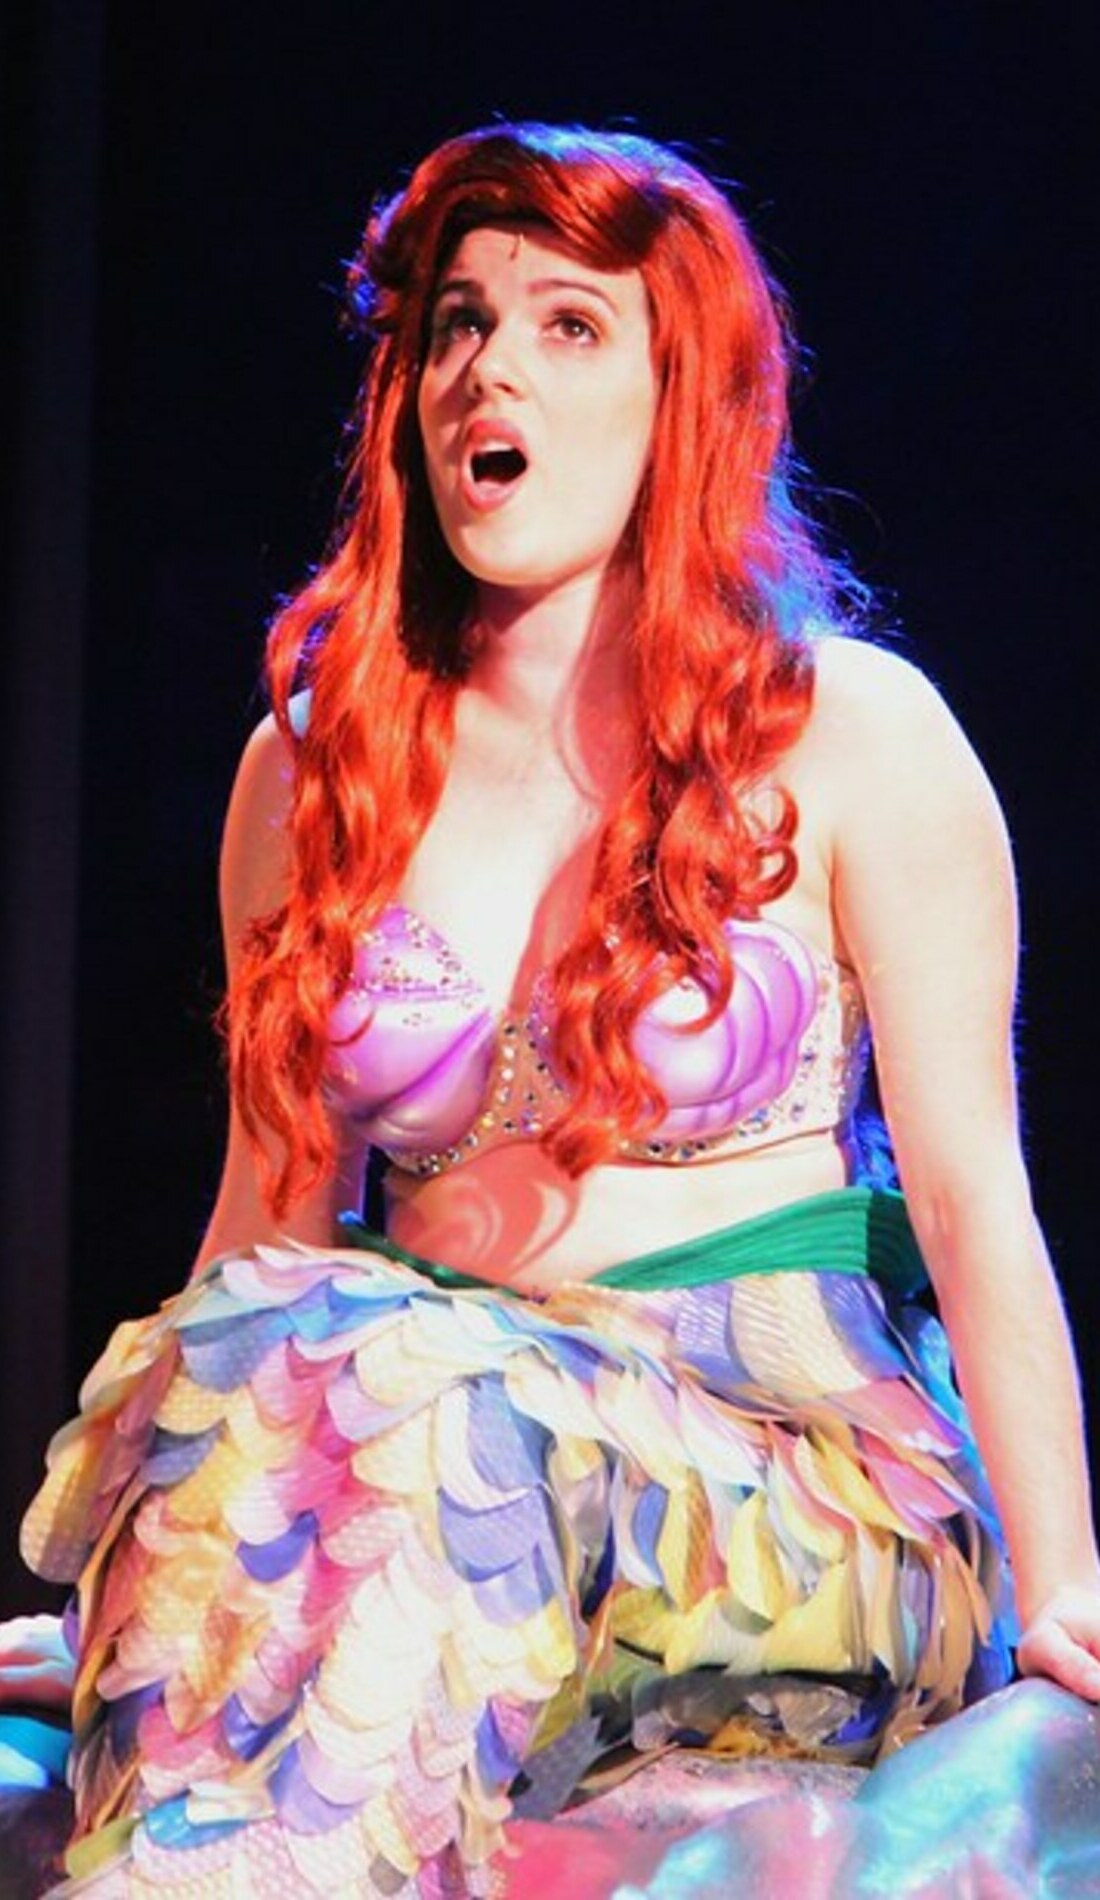 A The Little Mermaid live event